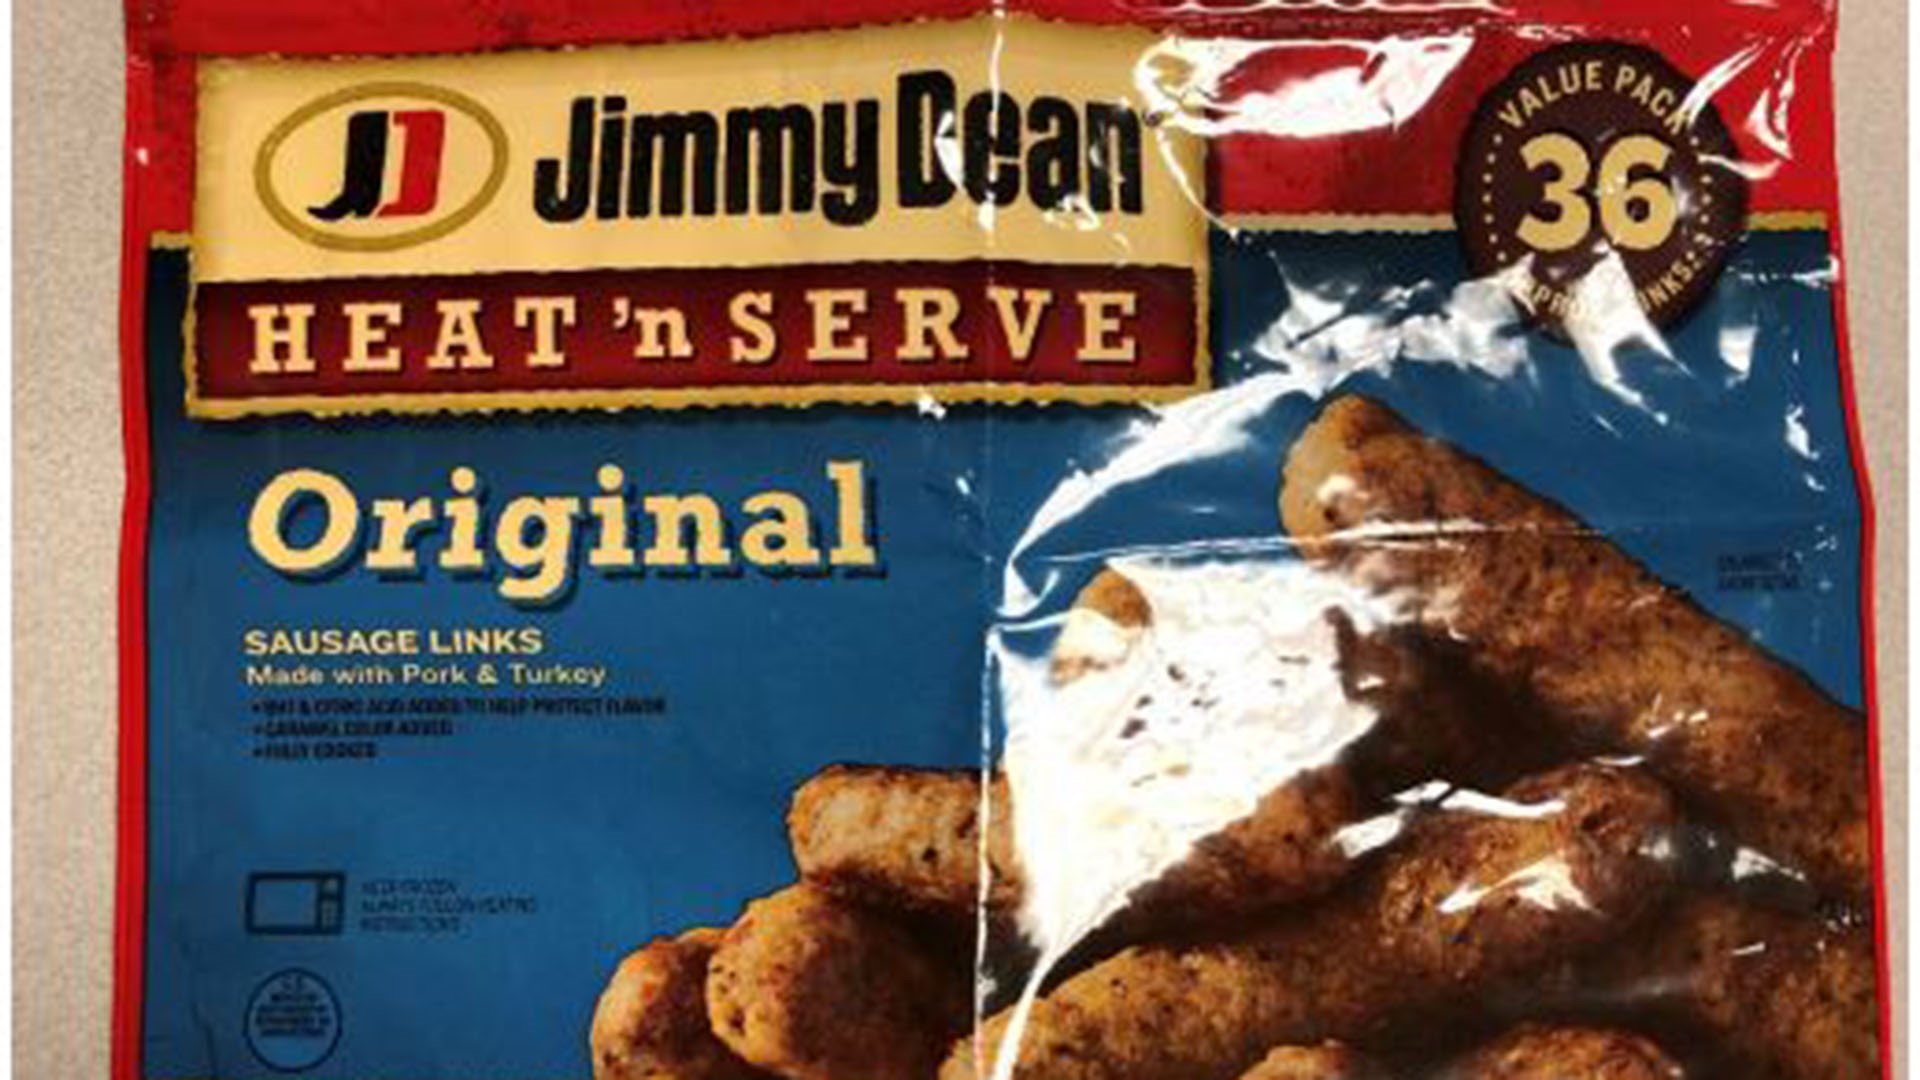 A variety of Jimmy Dean frozen, ready-to-eat sausage is being recalled because it may be contaminated with pieces of metal.